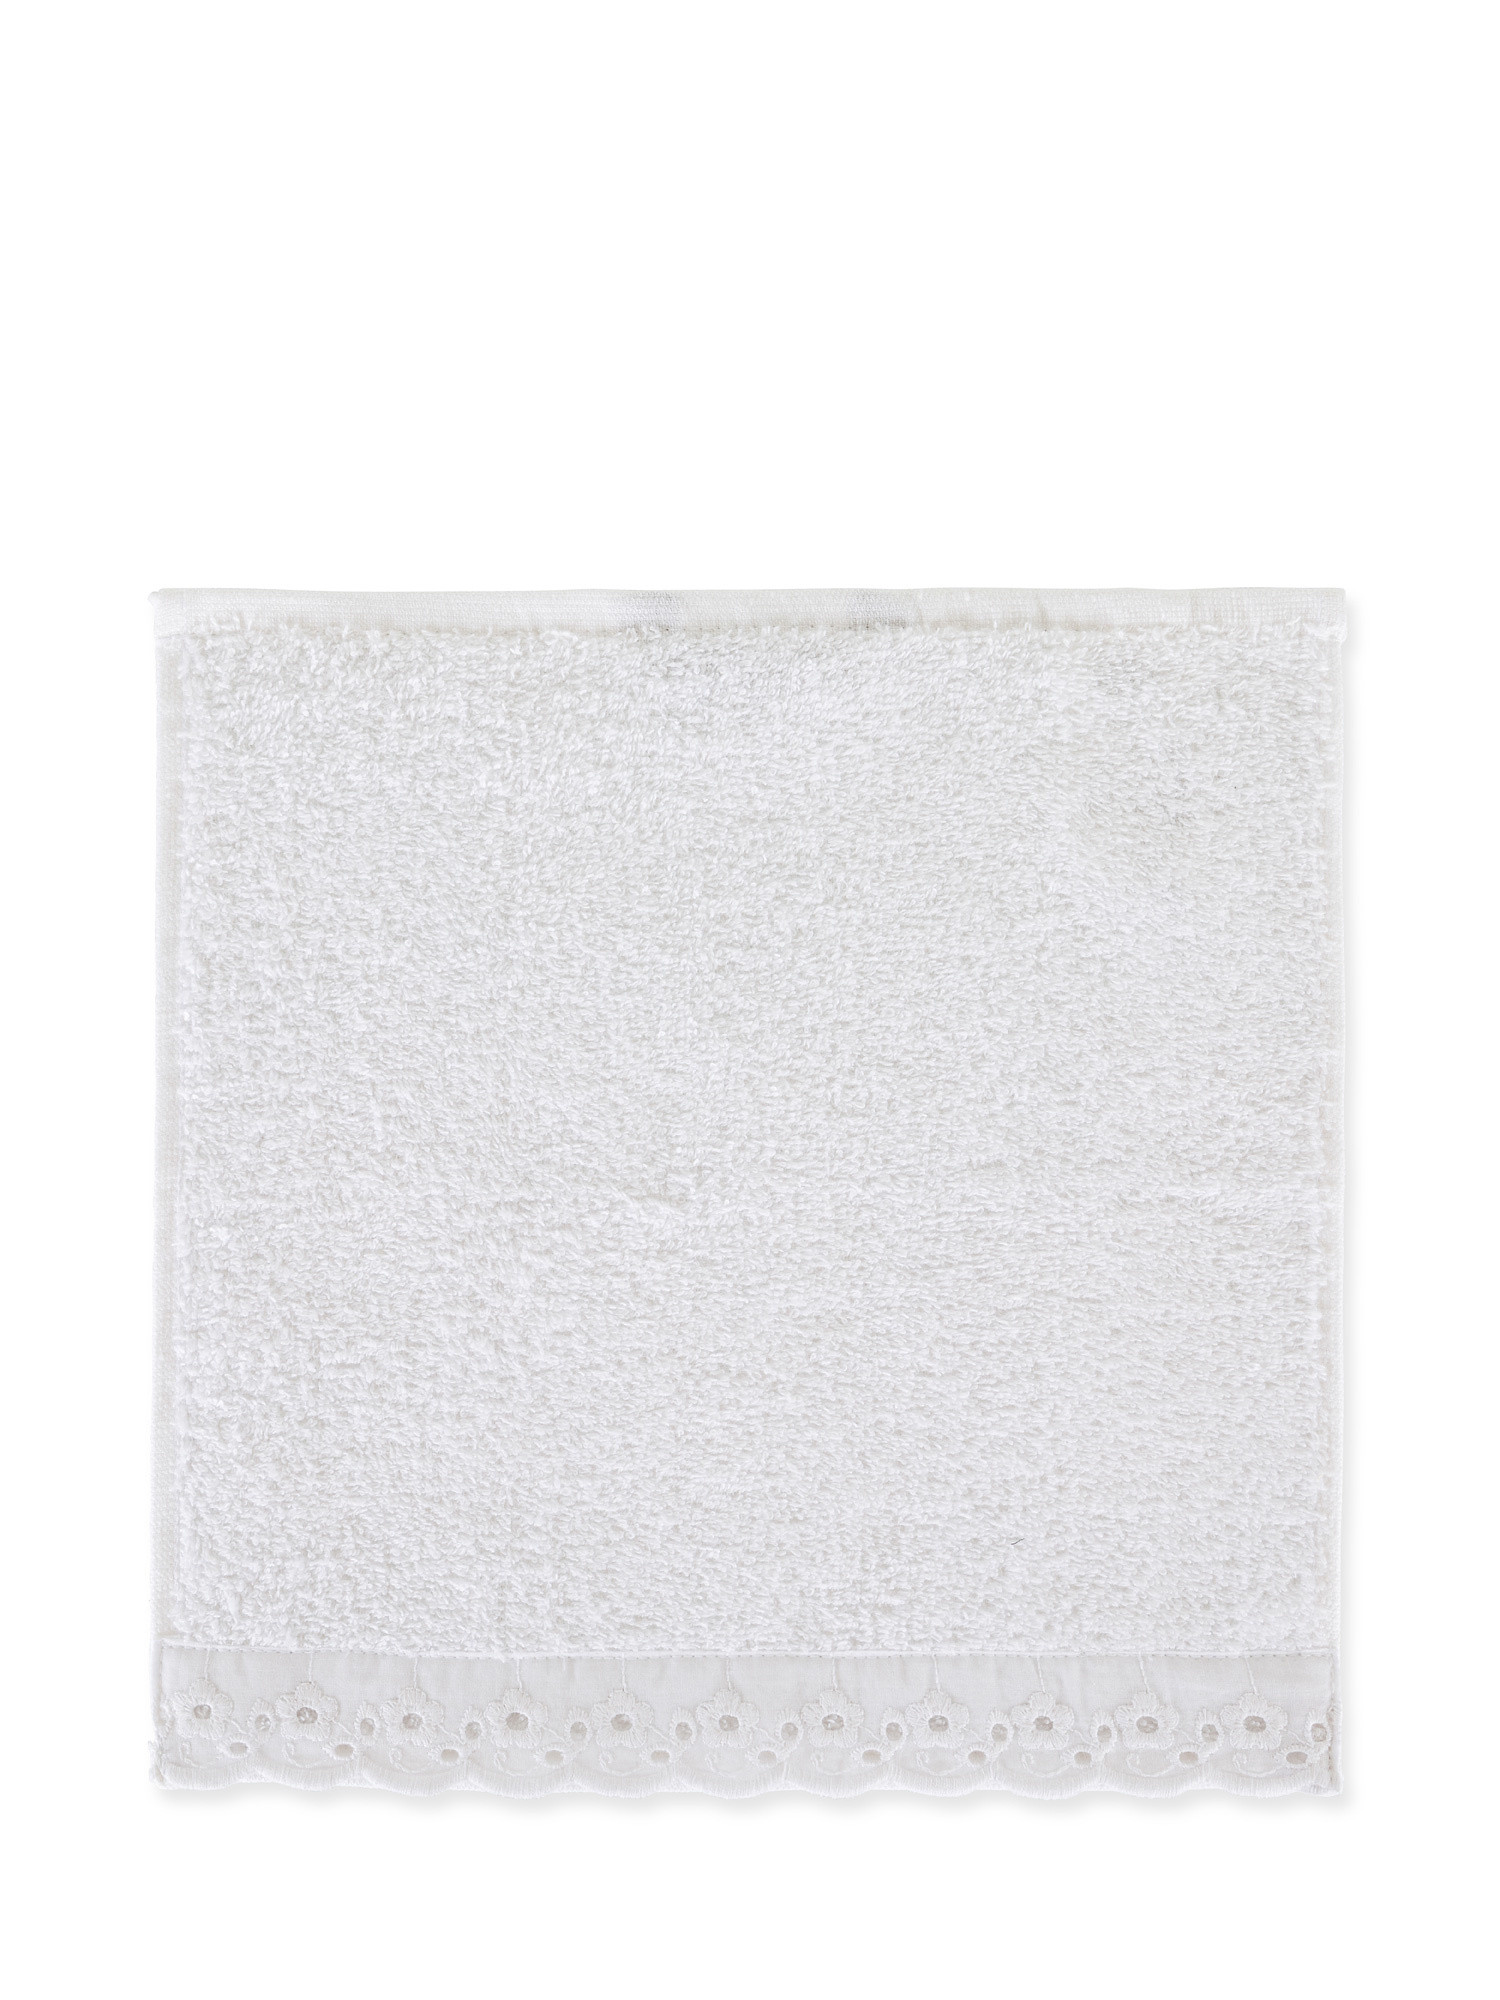 Set of 3 cotton terry washcloths with broderie anglaise, White, large image number 1